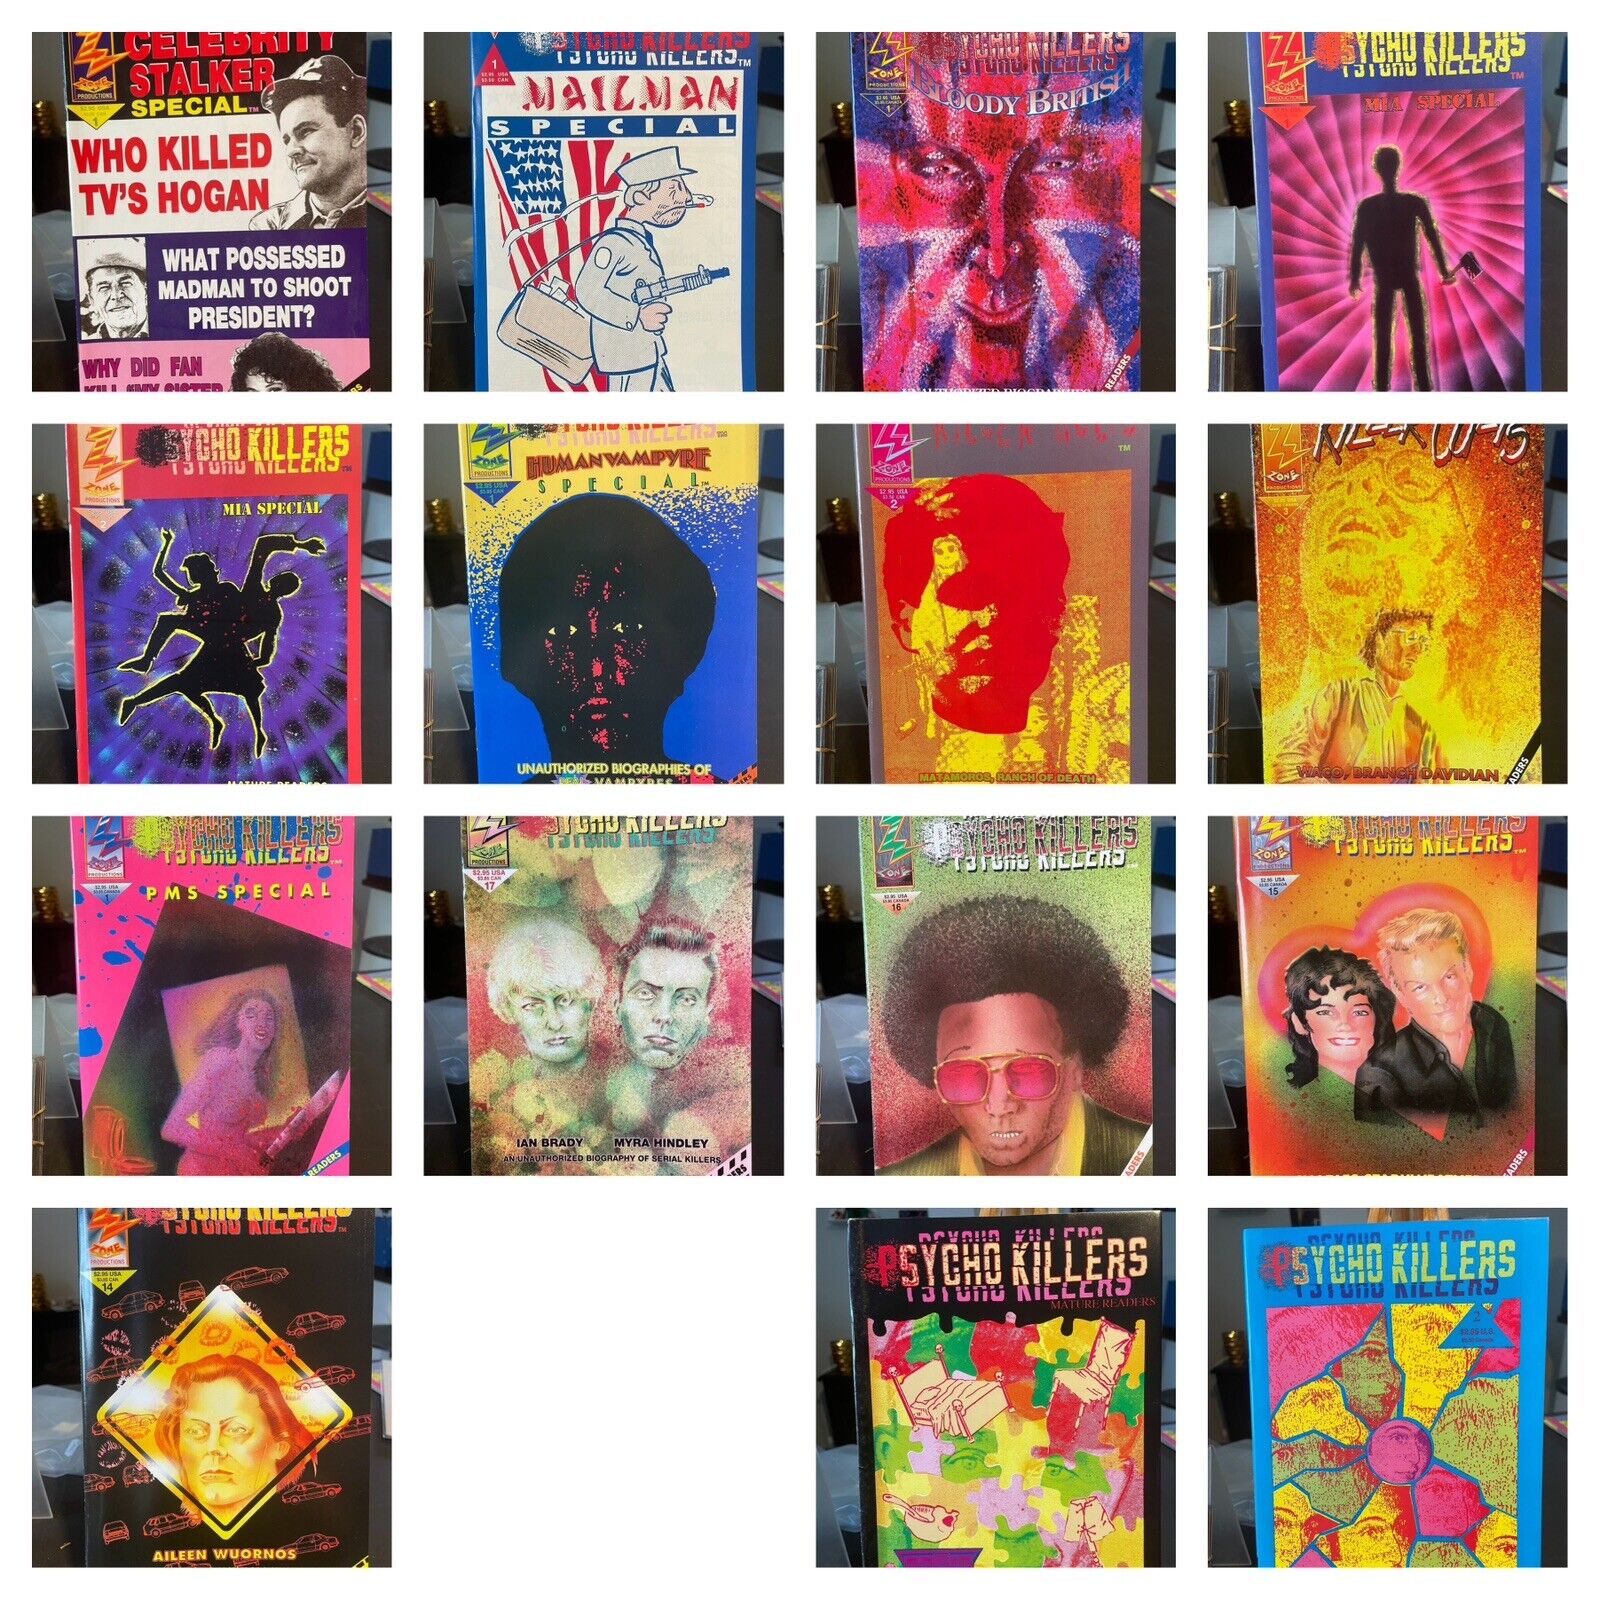 psycho killers comic book lot - 15 issues Son Of Sam, Gein and more Rare Indie